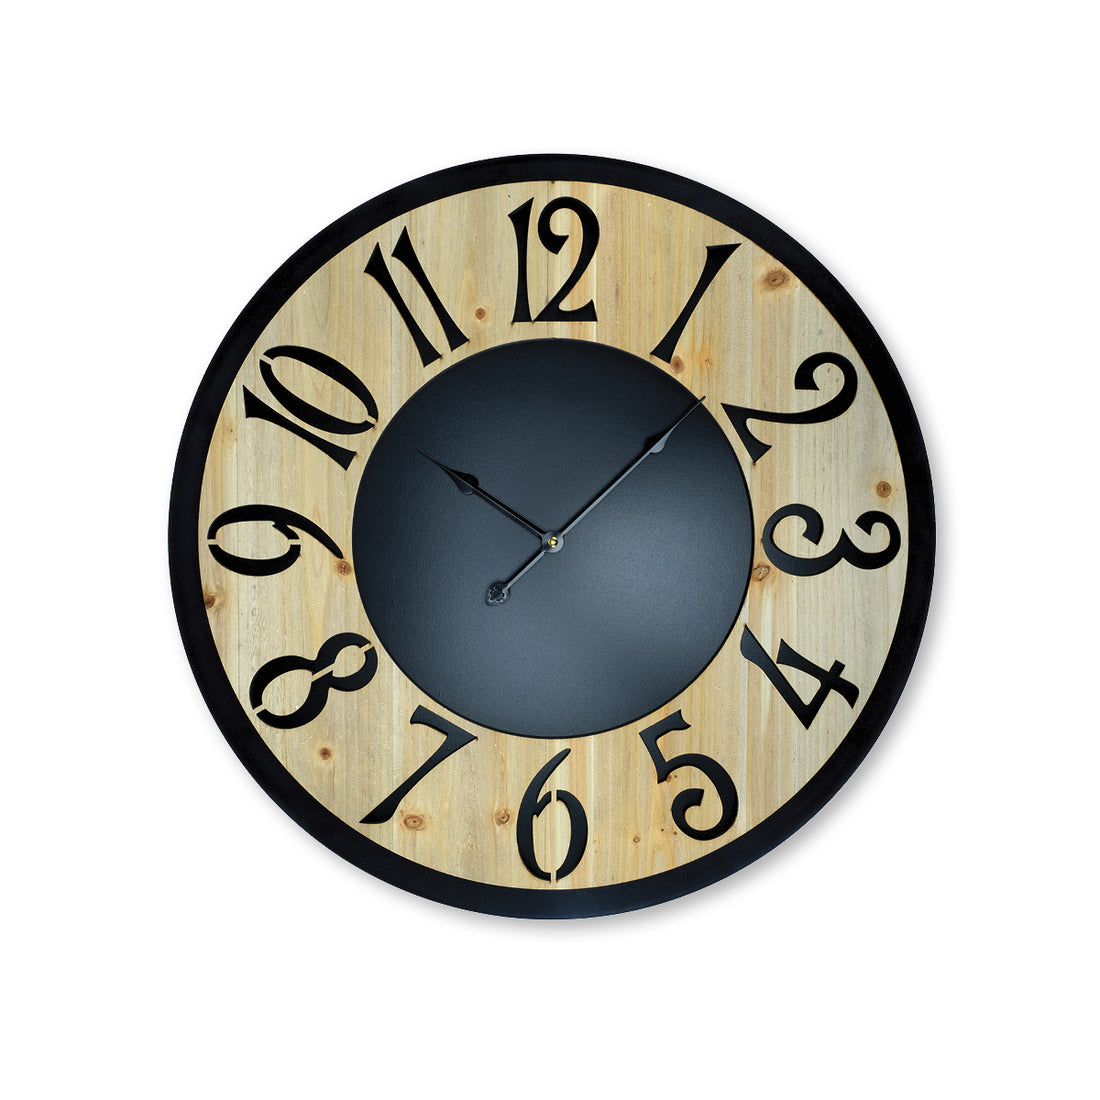 Home Master Wall Clock Wood &amp;amp; Metal Look Stylish Design Large Numbers 60cm-Home &amp; Garden &gt; Wall Art-PEROZ Accessories